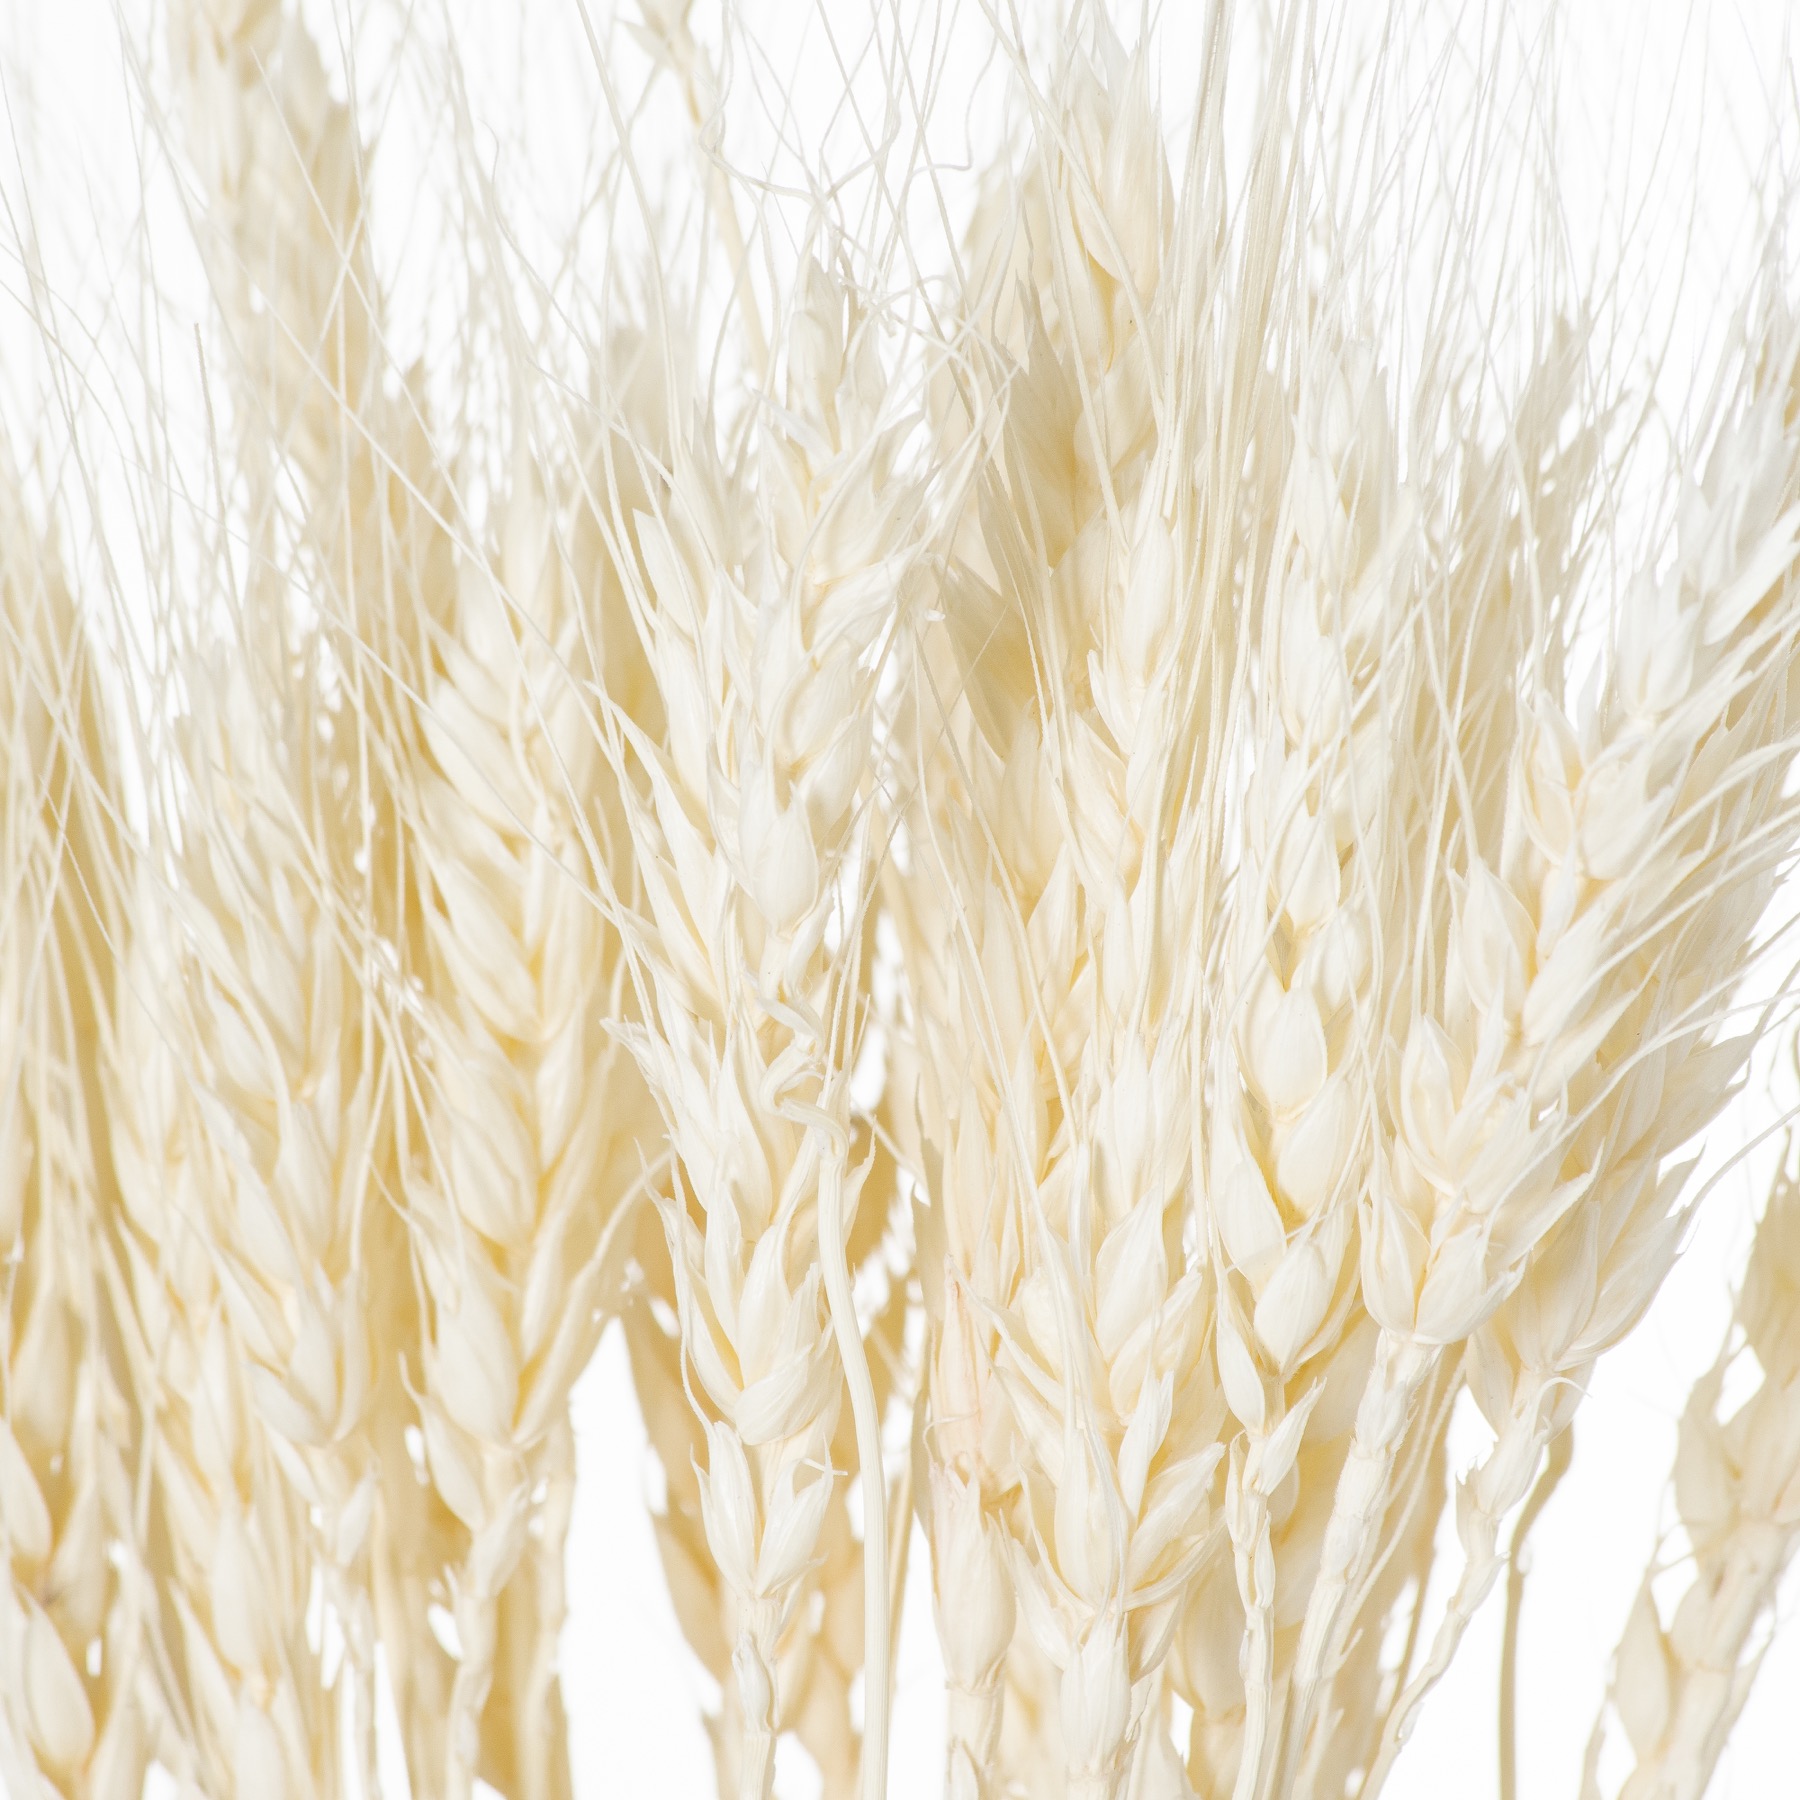 Dried White Wheat Bunch Of 20 - Image 3